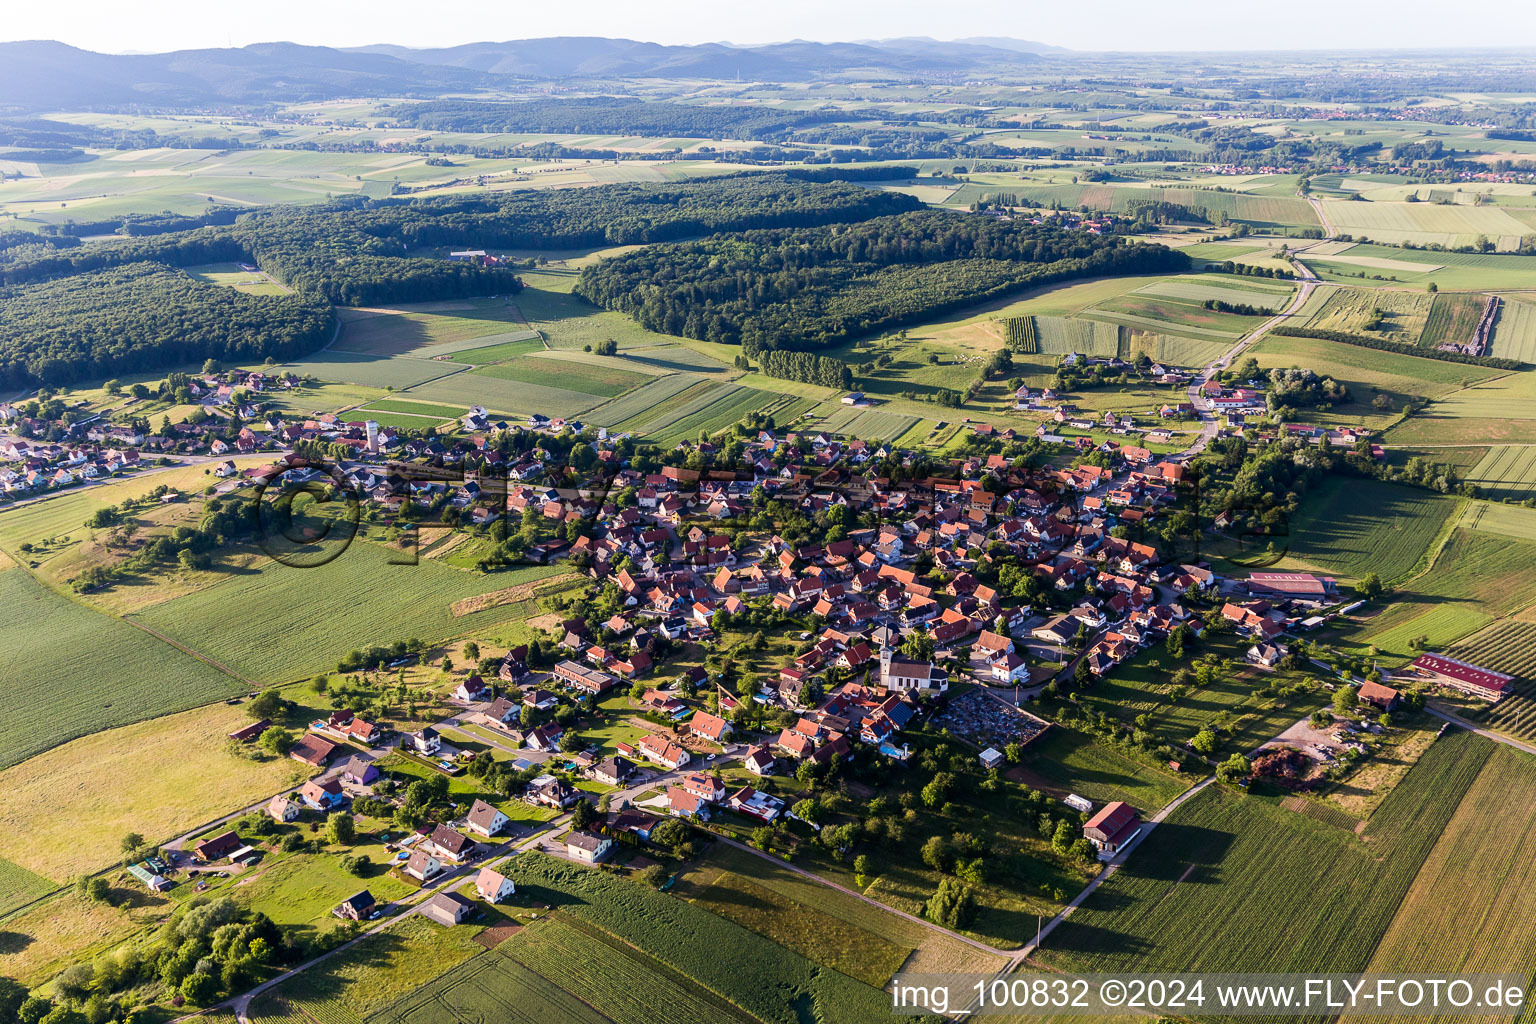 Aerial photograpy of Village - view on the edge of agricultural fields and farmland in Schoenenbourg in Grand Est, France